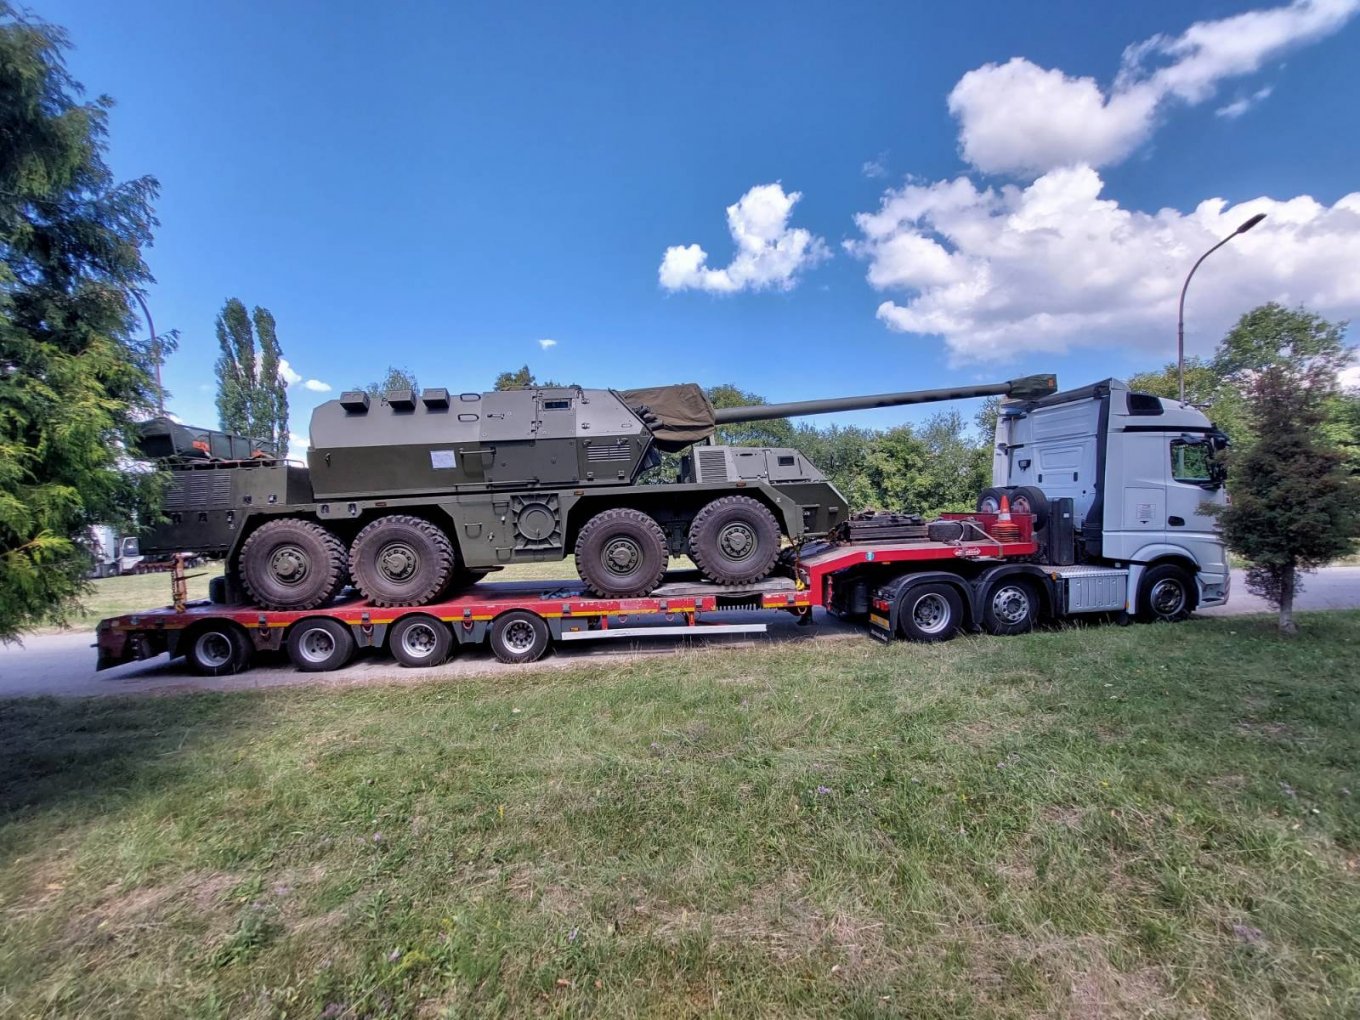 One of the first Zuzana 2 howitzers to arrive in Ukraine, August 2022 / Defense Express / Slovakian Government Accused of Sending Barrels Intended for Ukraine's Zuzana 2 to Azerbaijan for DITA Instead